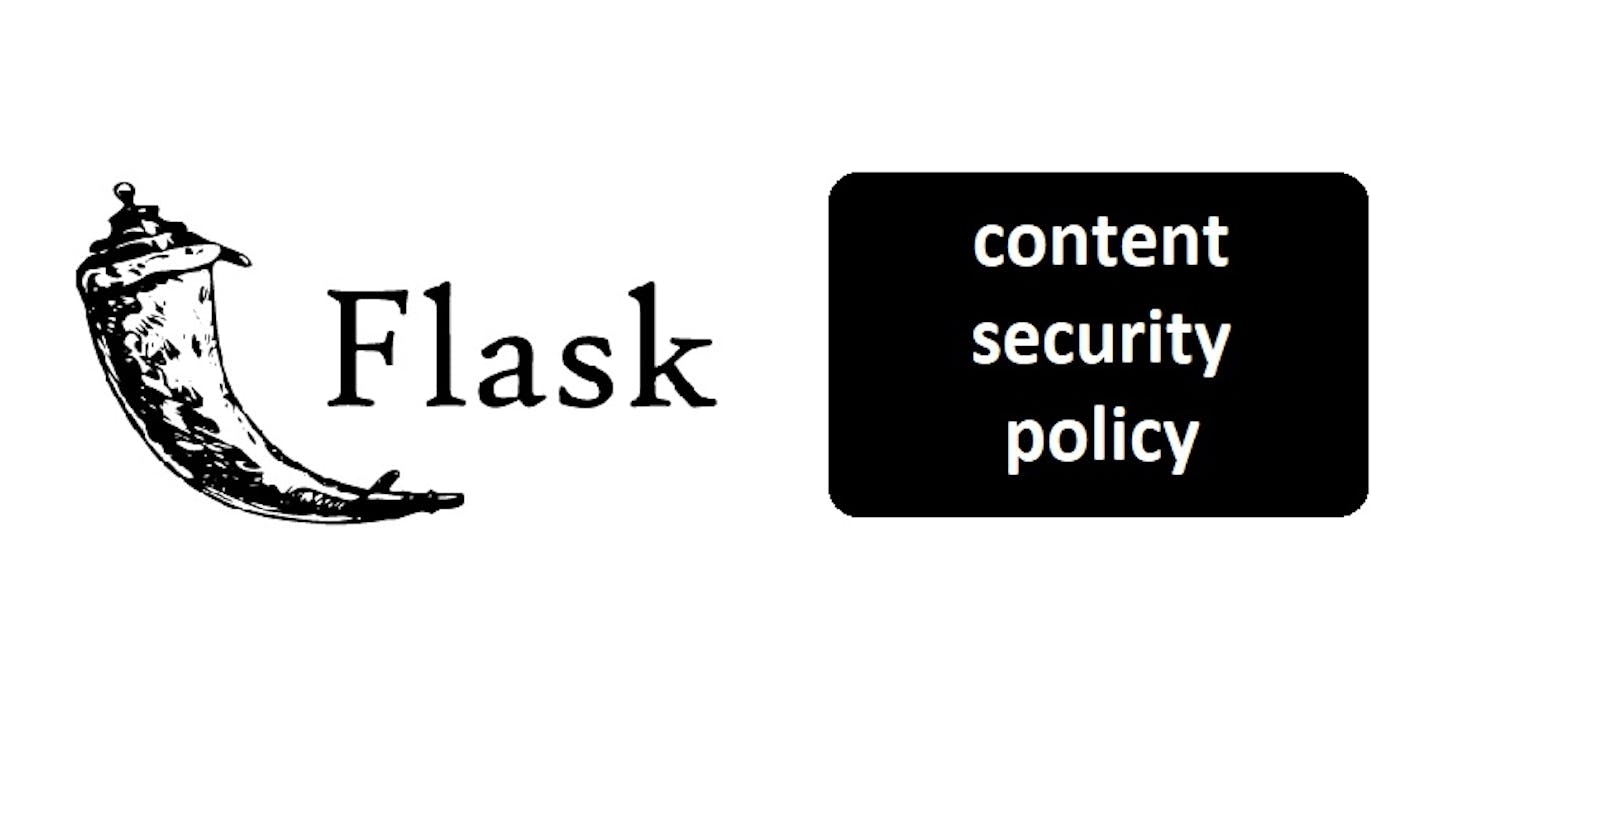 Content security policy explained using Flask